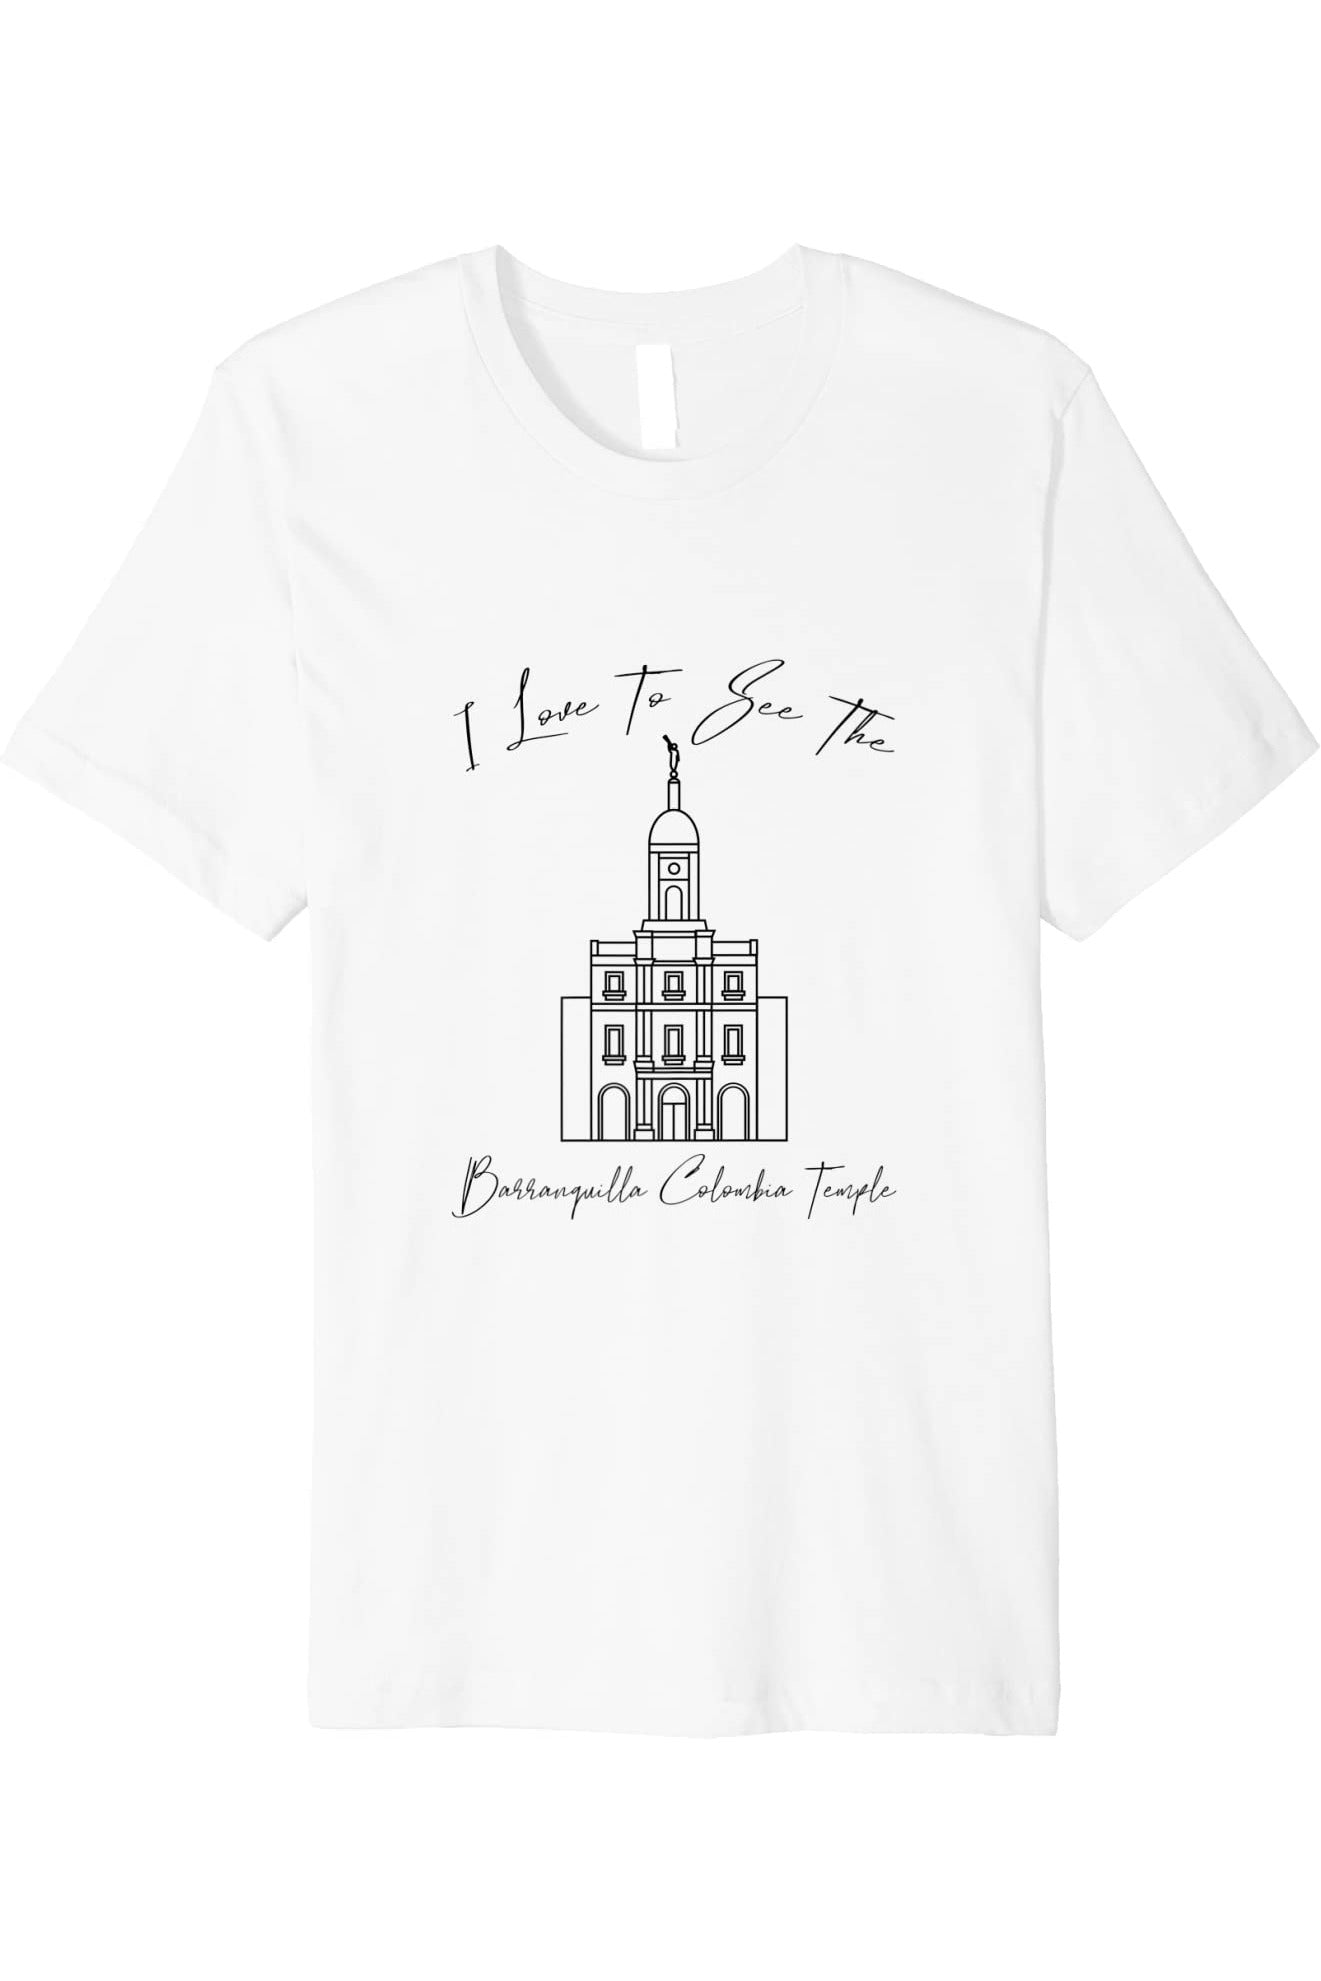 Barranquilla Colombia Temple T-Shirt - Premium - Calligraphy Style (English) US